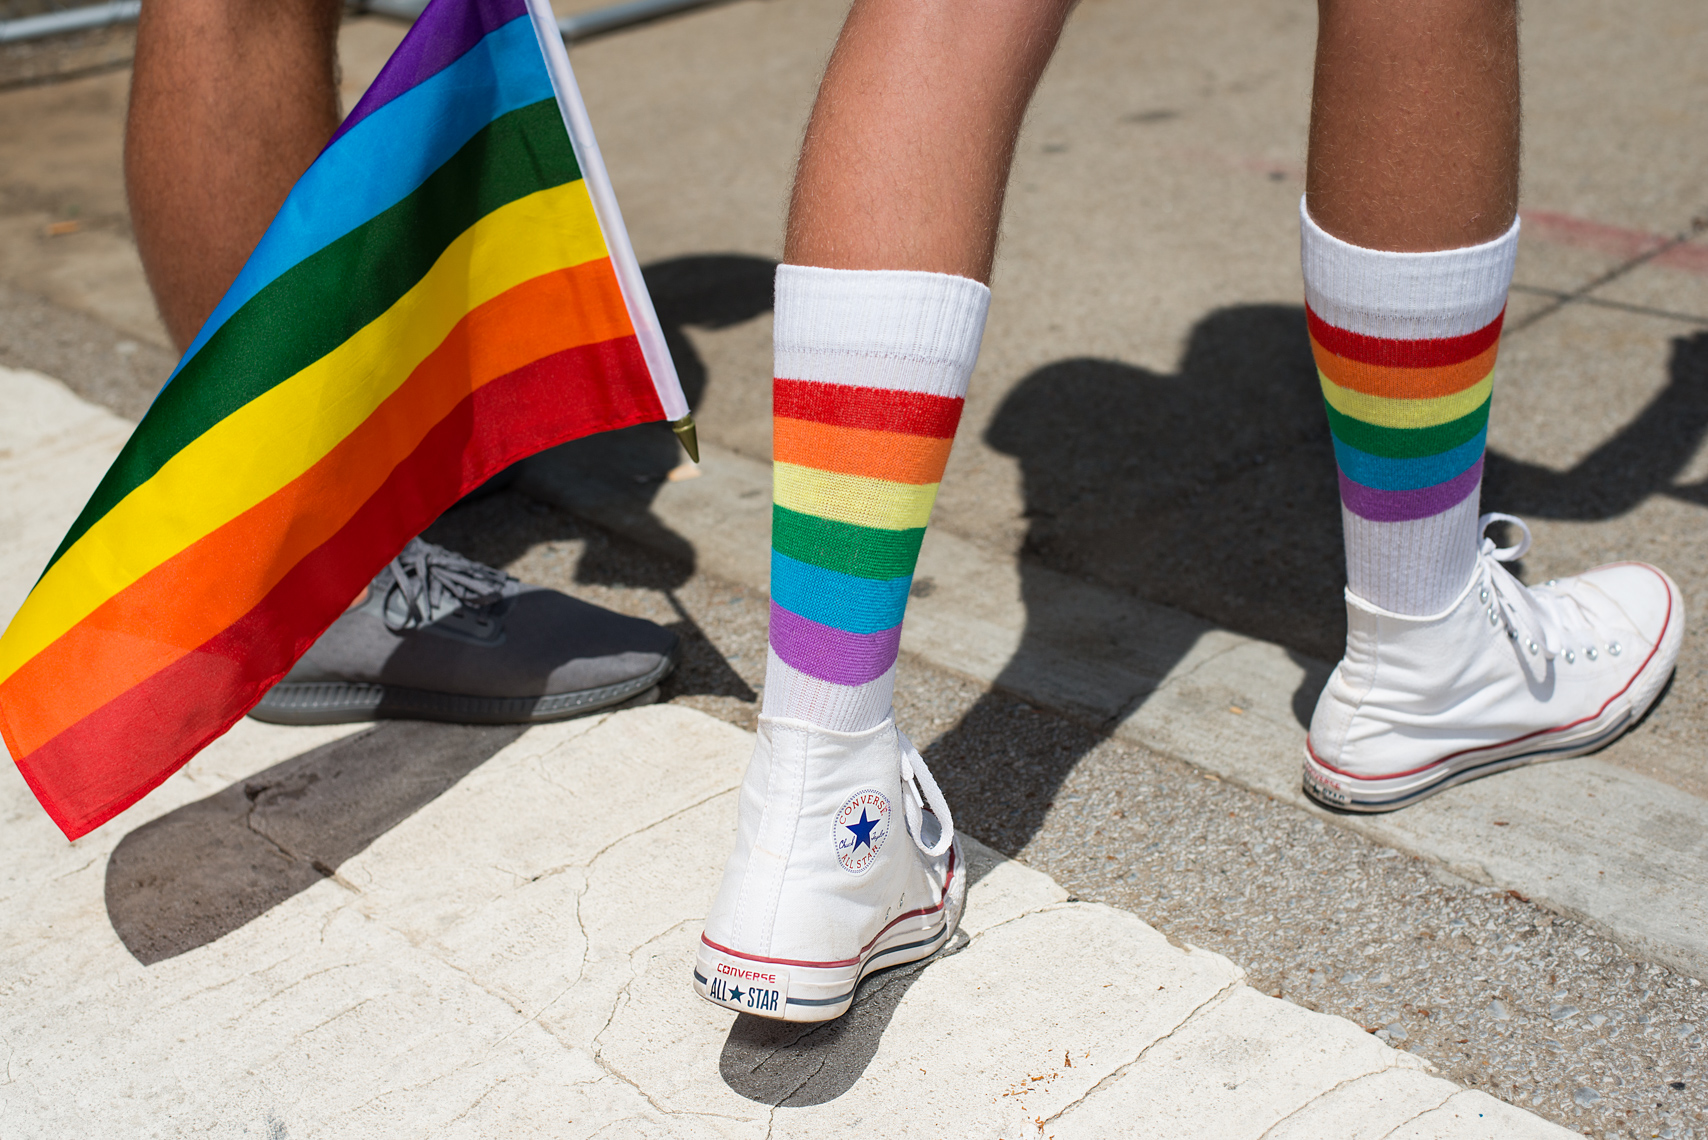 Pride socks and converse shoes on pavement during the Nashville Pride Festival in Nashville Tennessee. Photography by Kristina Krug. Tennessee has passed strict laws banning drag shows. Social issues, LGBTQ rights, advocacy, legal, Supreme Court.